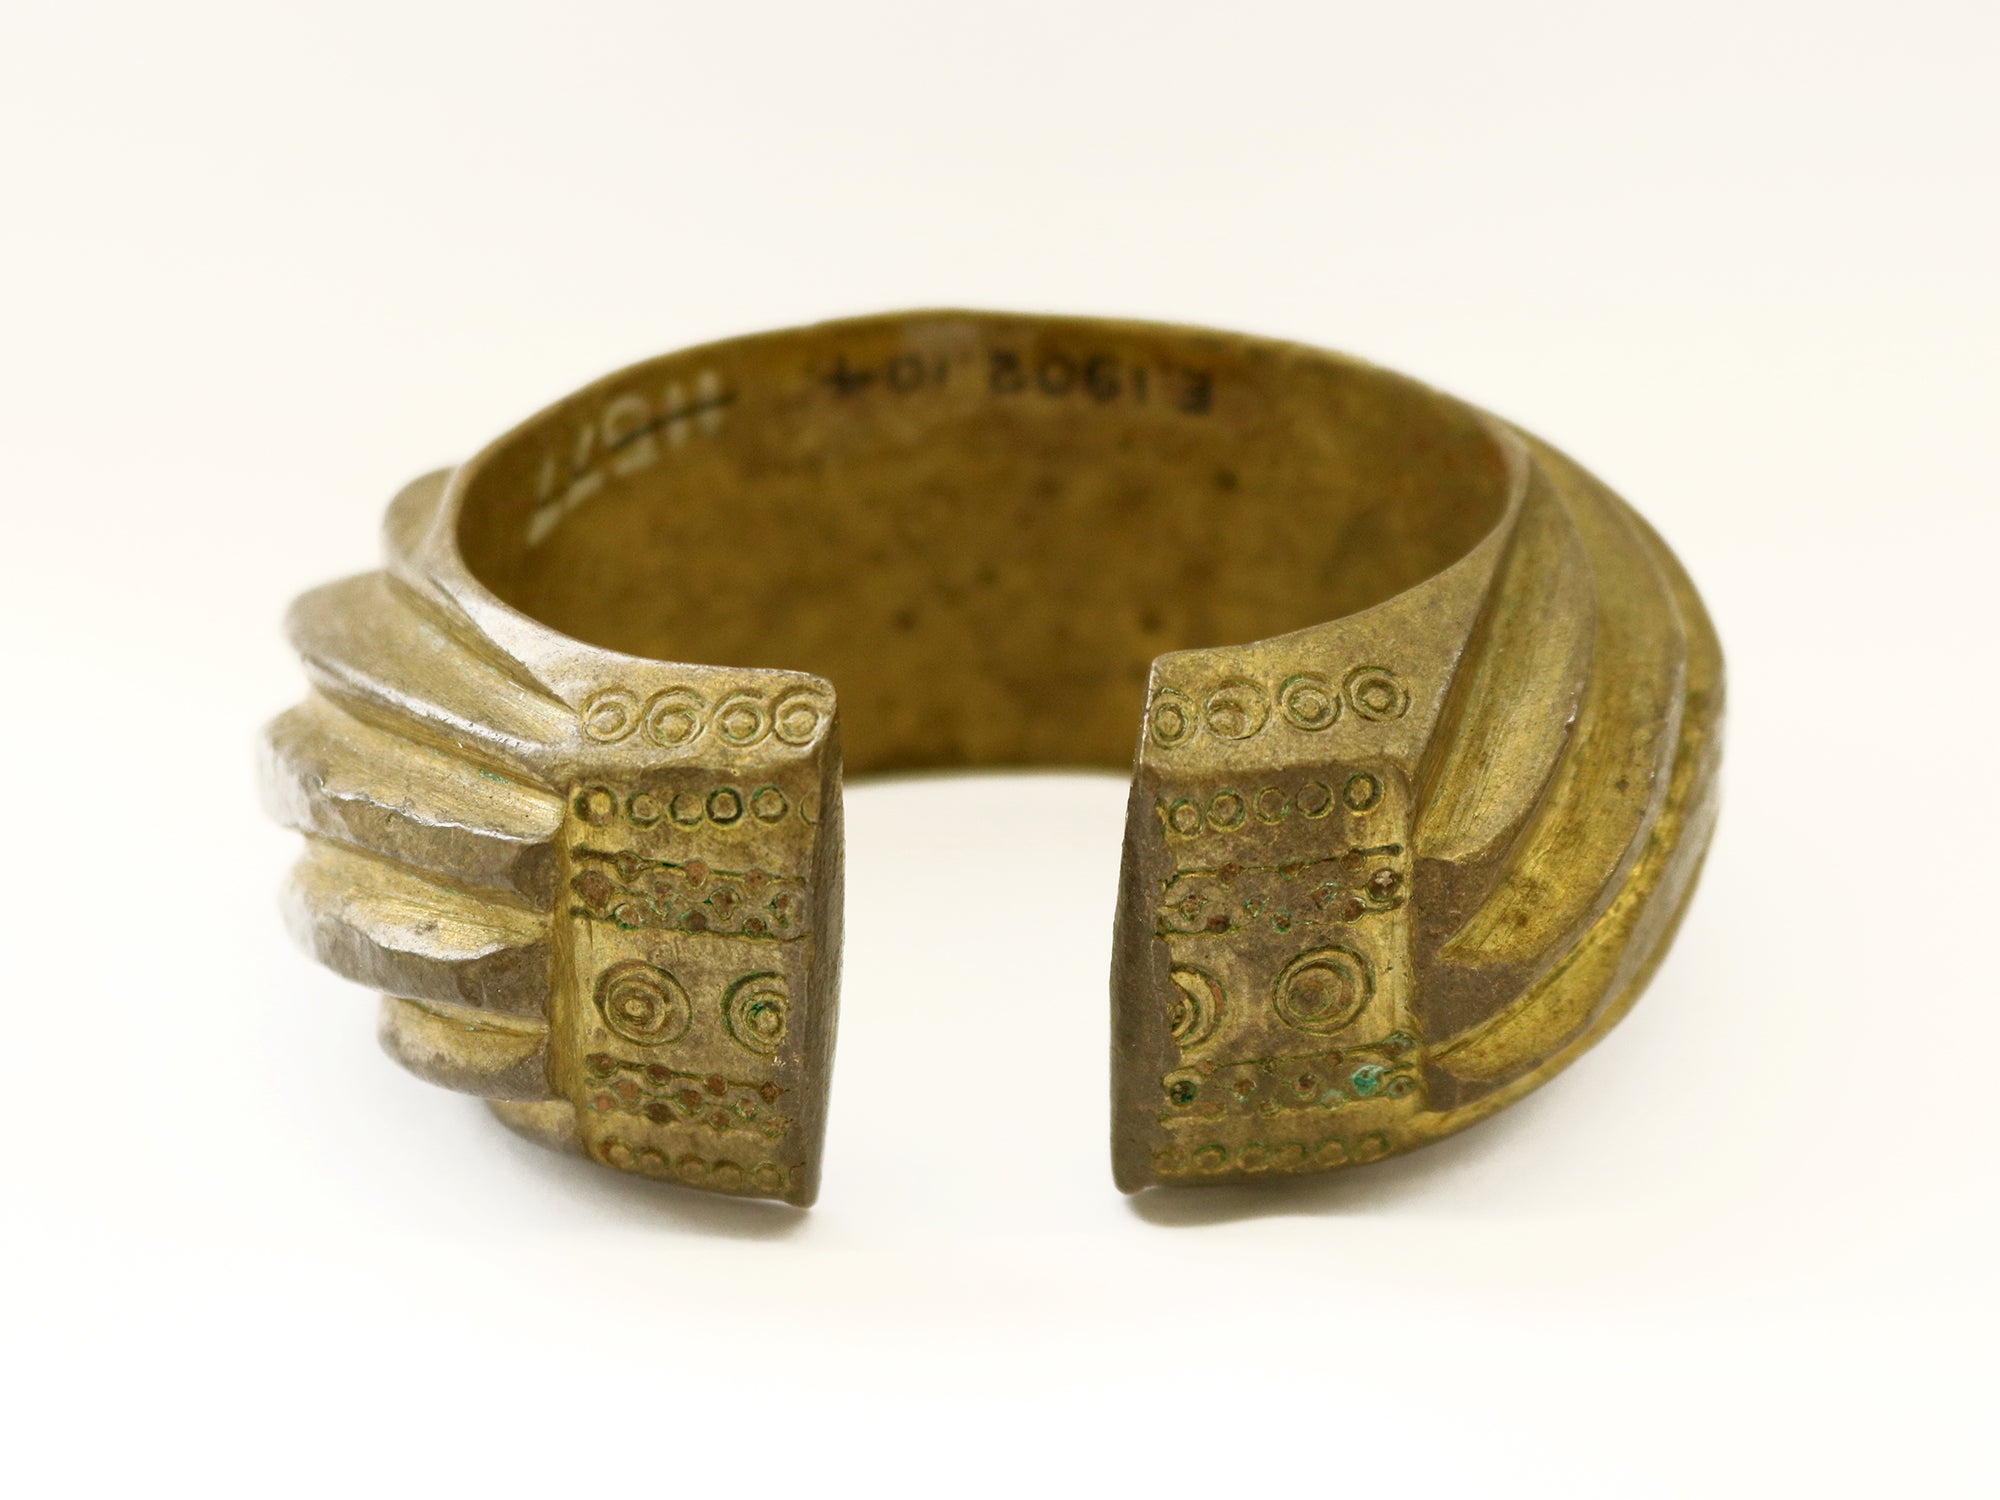 A brass penannular bracelet looted from Benin City by British colonial forces in 1897, which is currently held in the collections of Cambridge’s Museum of Archaeology and Anthropology but could be returned to Nigeria. (Cambridge University/ PA)